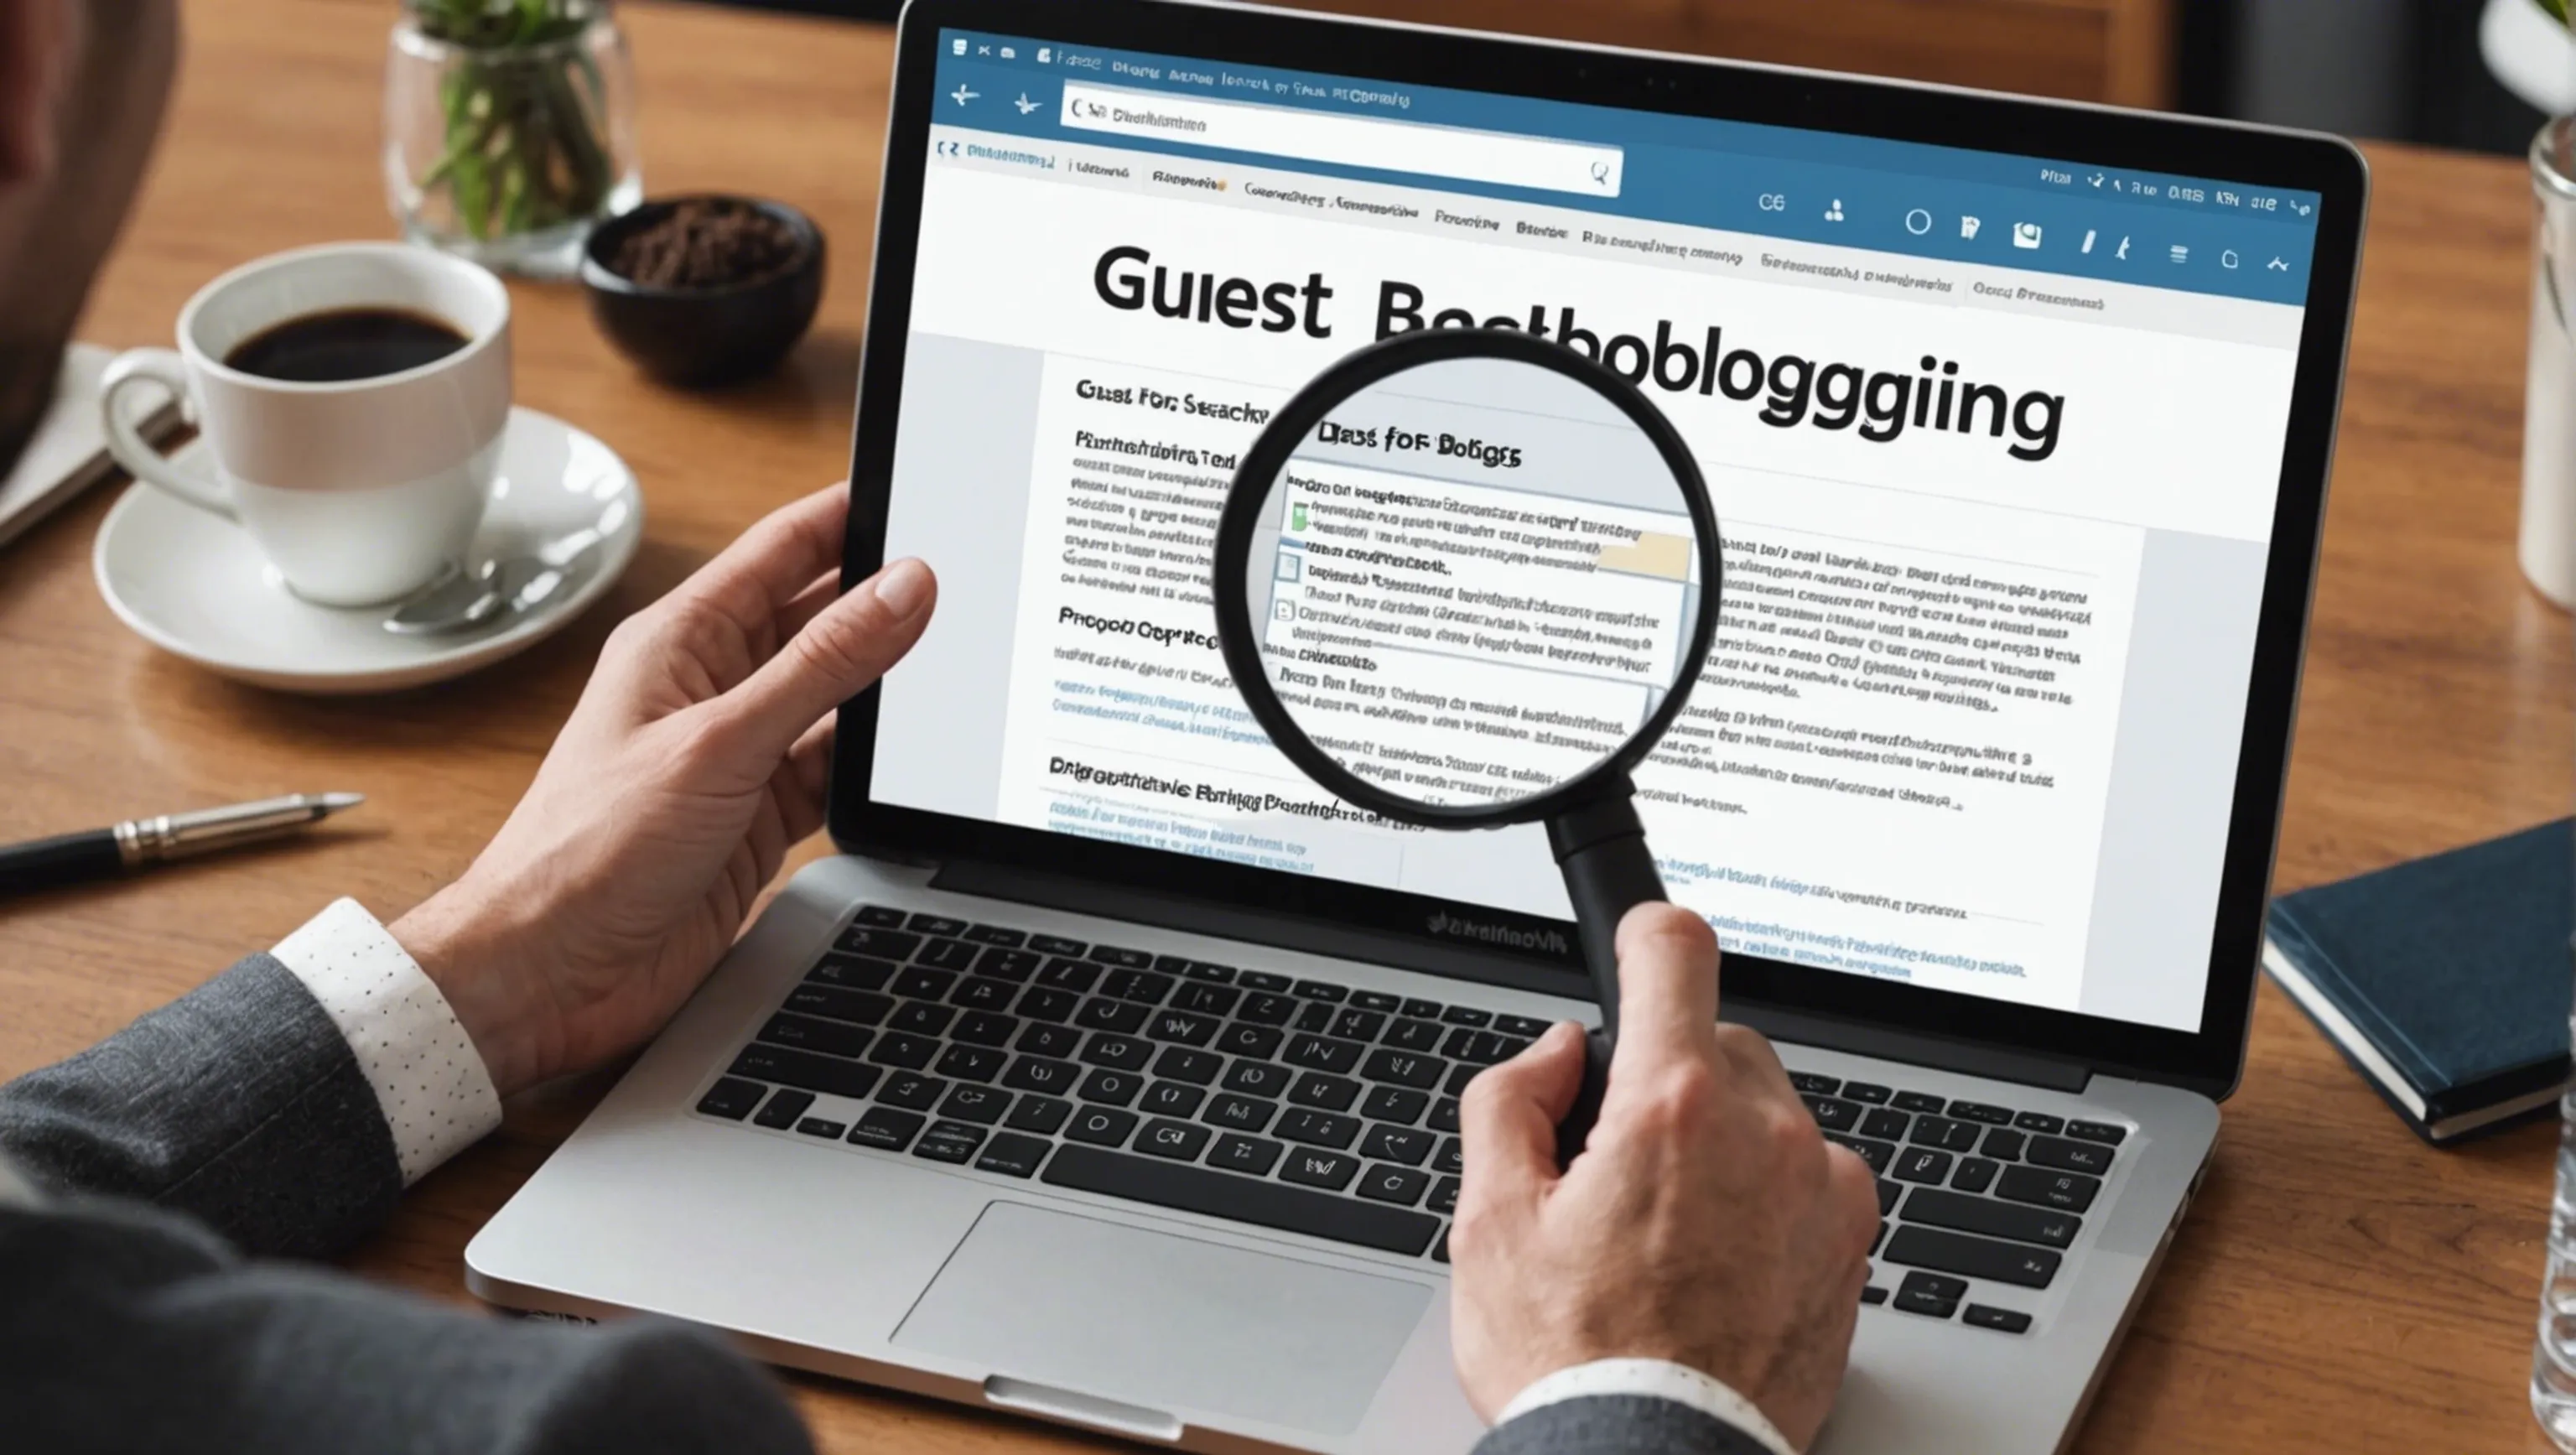 Using advanced search operators for guest blogging prospects